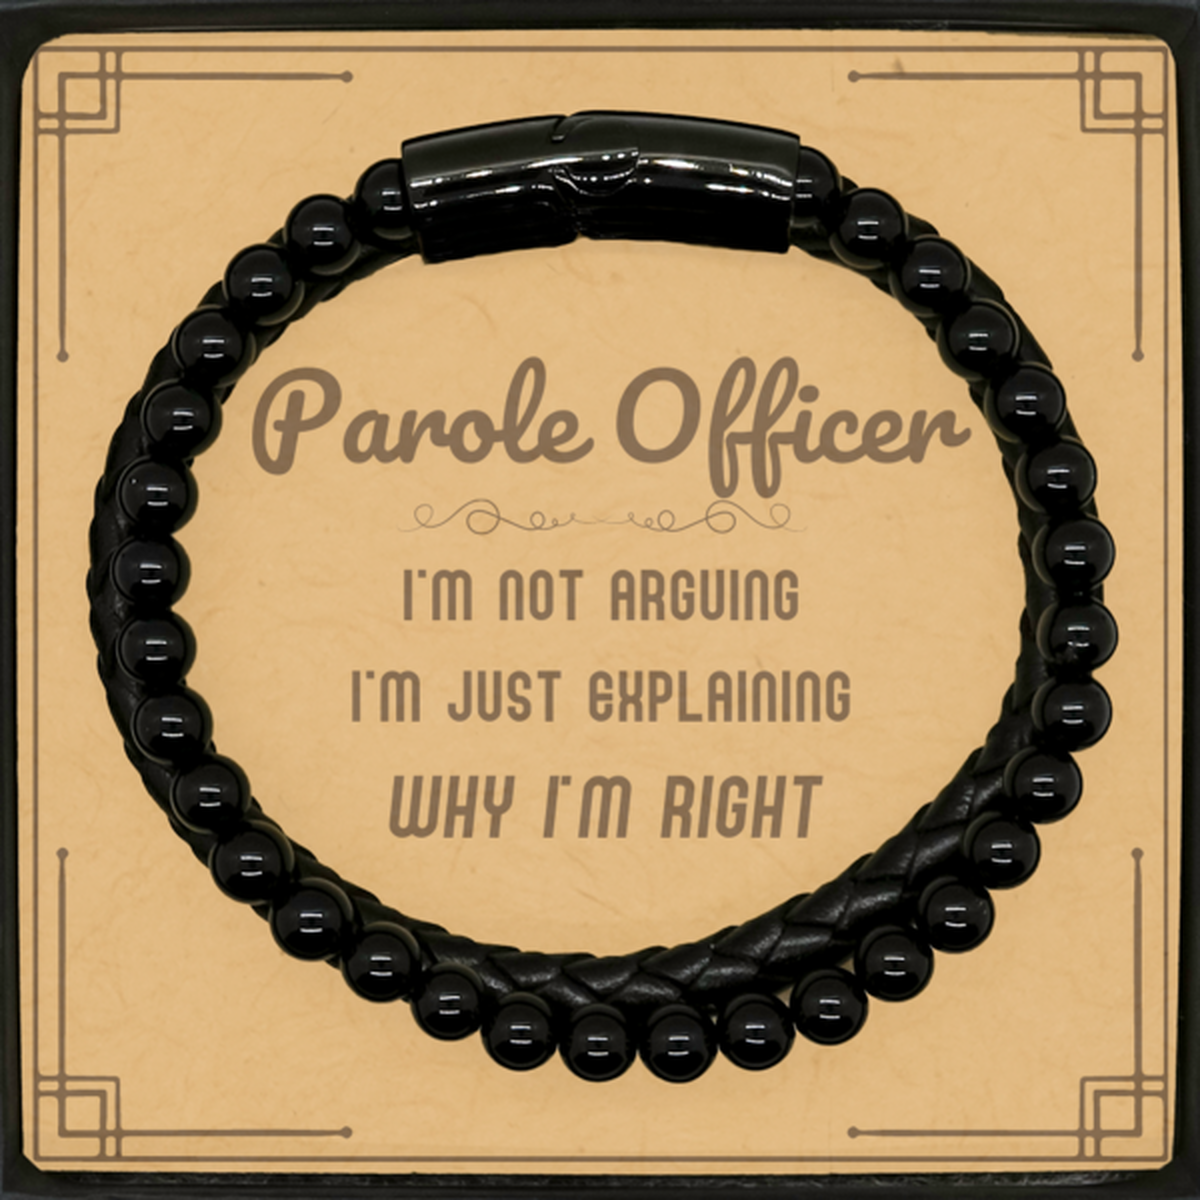 Parole Officer I'm not Arguing. I'm Just Explaining Why I'm RIGHT Stone Leather Bracelets, Funny Saying Quote Parole Officer Gifts For Parole Officer Message Card Graduation Birthday Christmas Gifts for Men Women Coworker